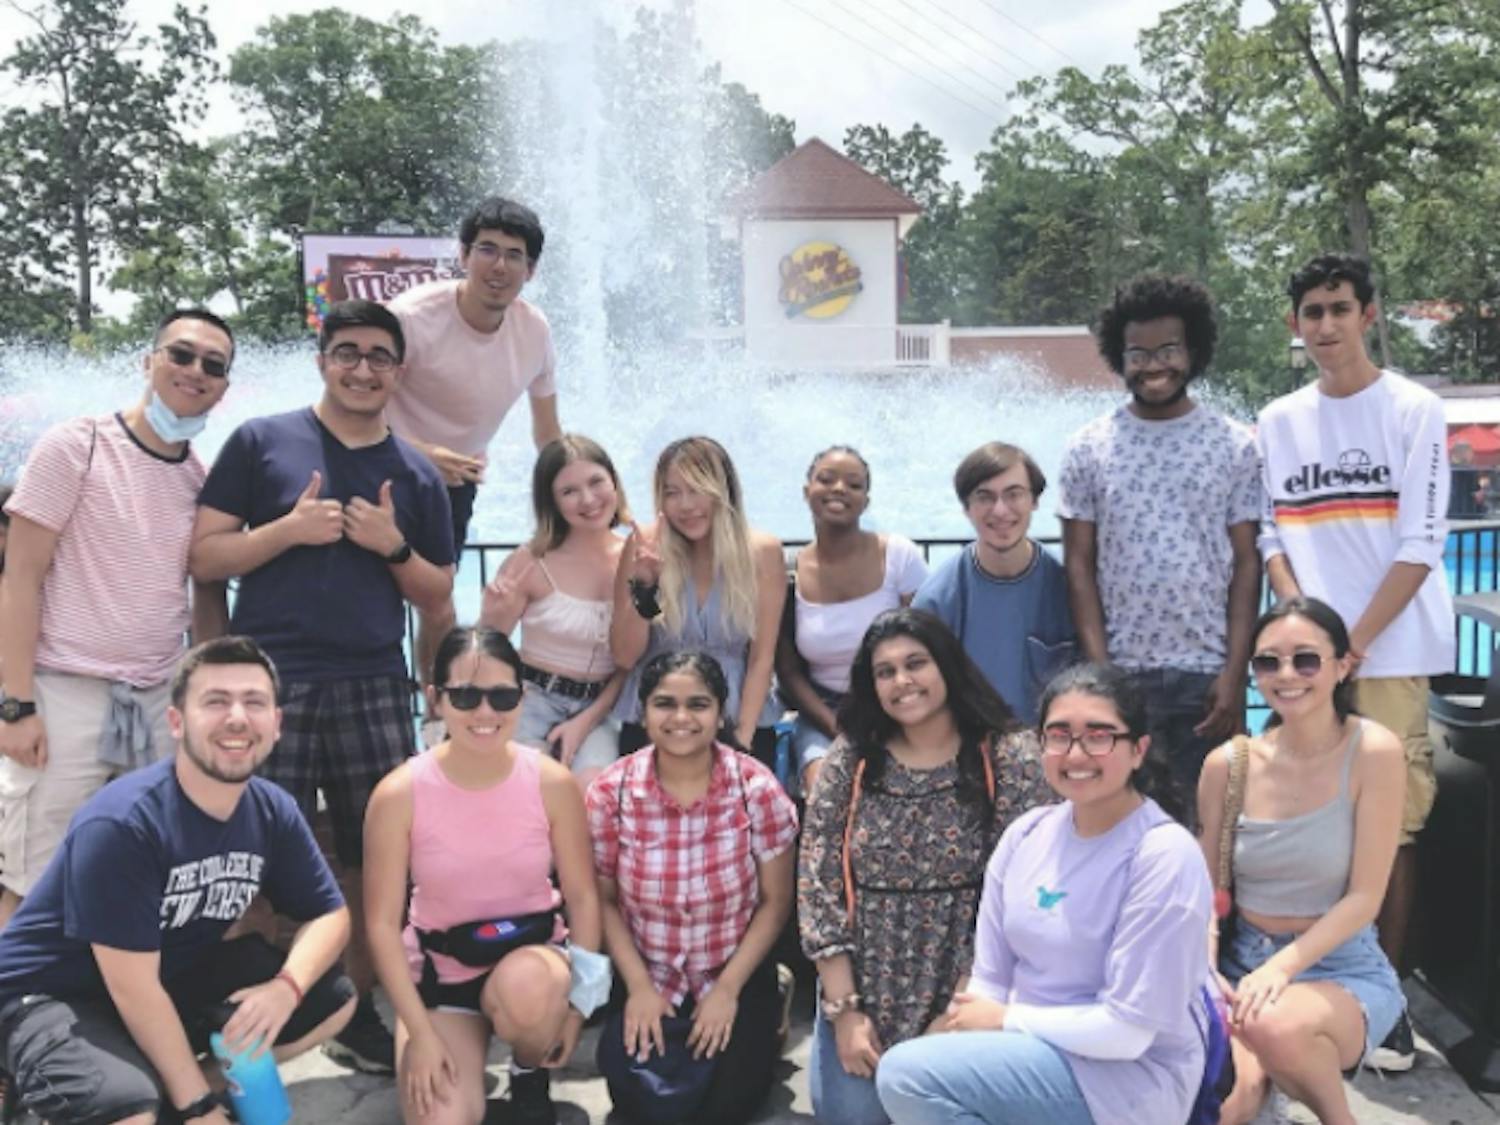 May, in the middle holding the peace sign, along with Kappa Theta Phi members at Six Flags Great Adventure (Instagram @kdptcnj).  